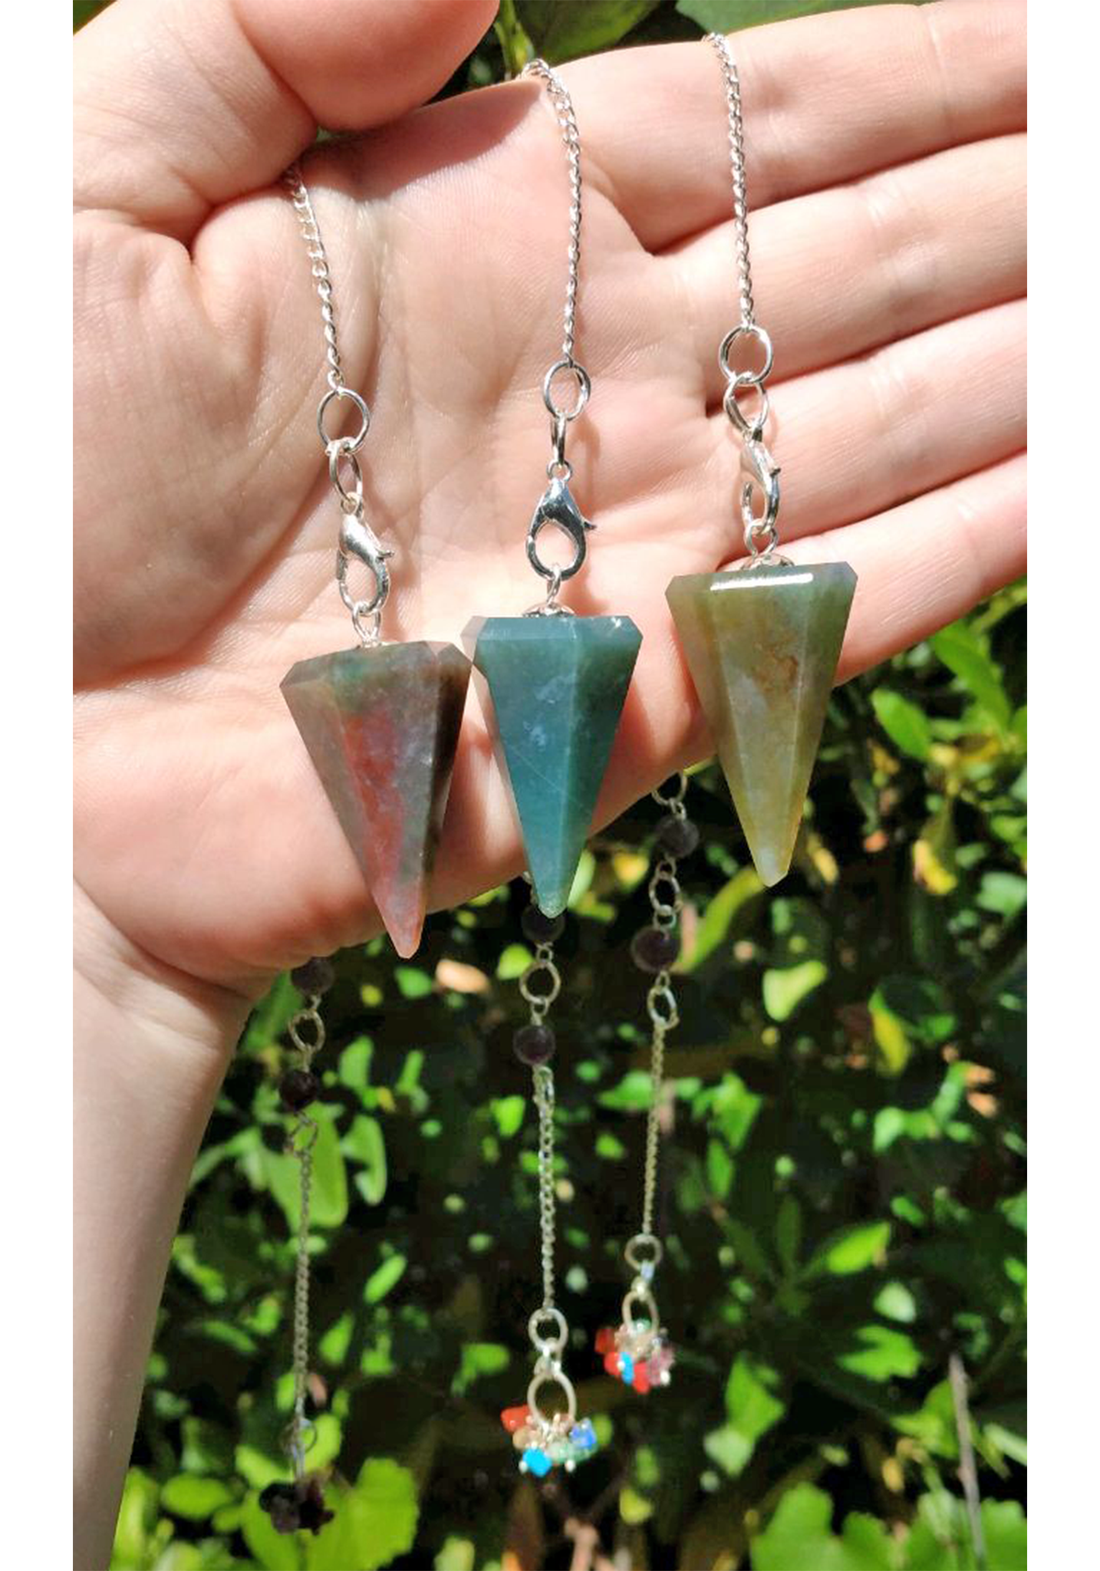 Moss Agate Gemstone Polished Pendulum with Chakra Beaded Chain - Pictured: Three diffferently colored Moss Agate Pendulums, to show variety.